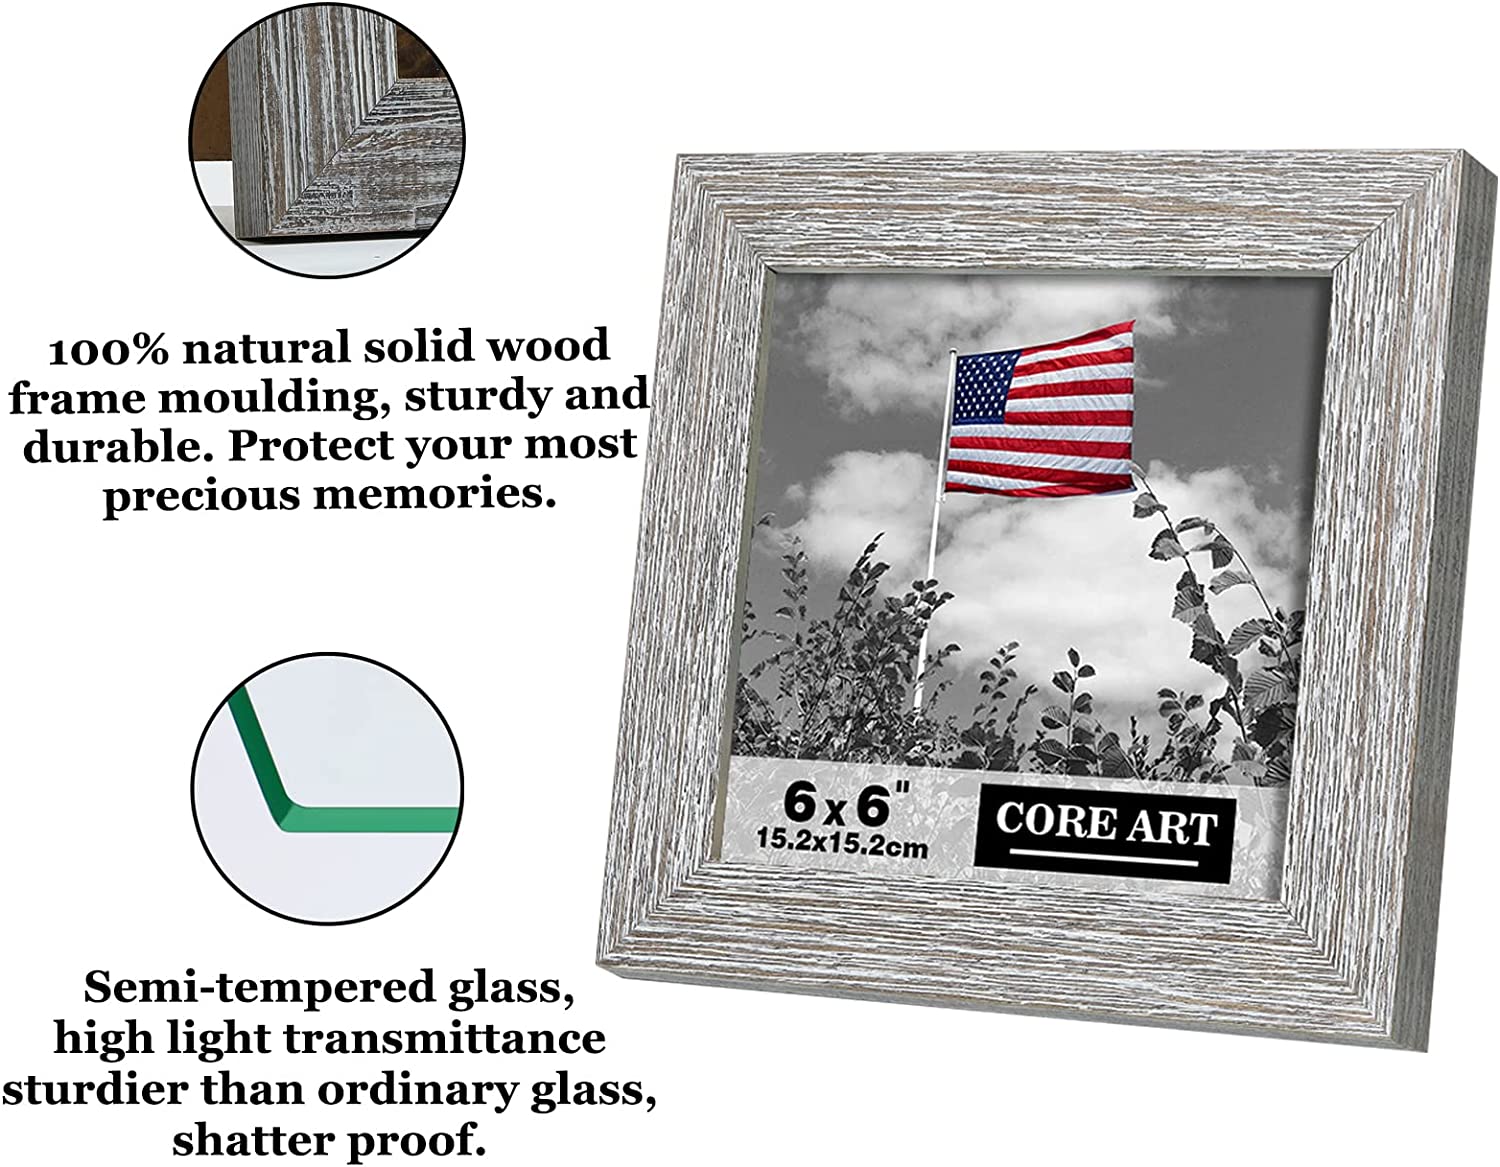 CORE ART 6x6 Picture Frame Square Wood Rustic Gray (Grey) Photo Frames Set of 2 High Definition Semi-tempered Glass Wall or Tabletop Display